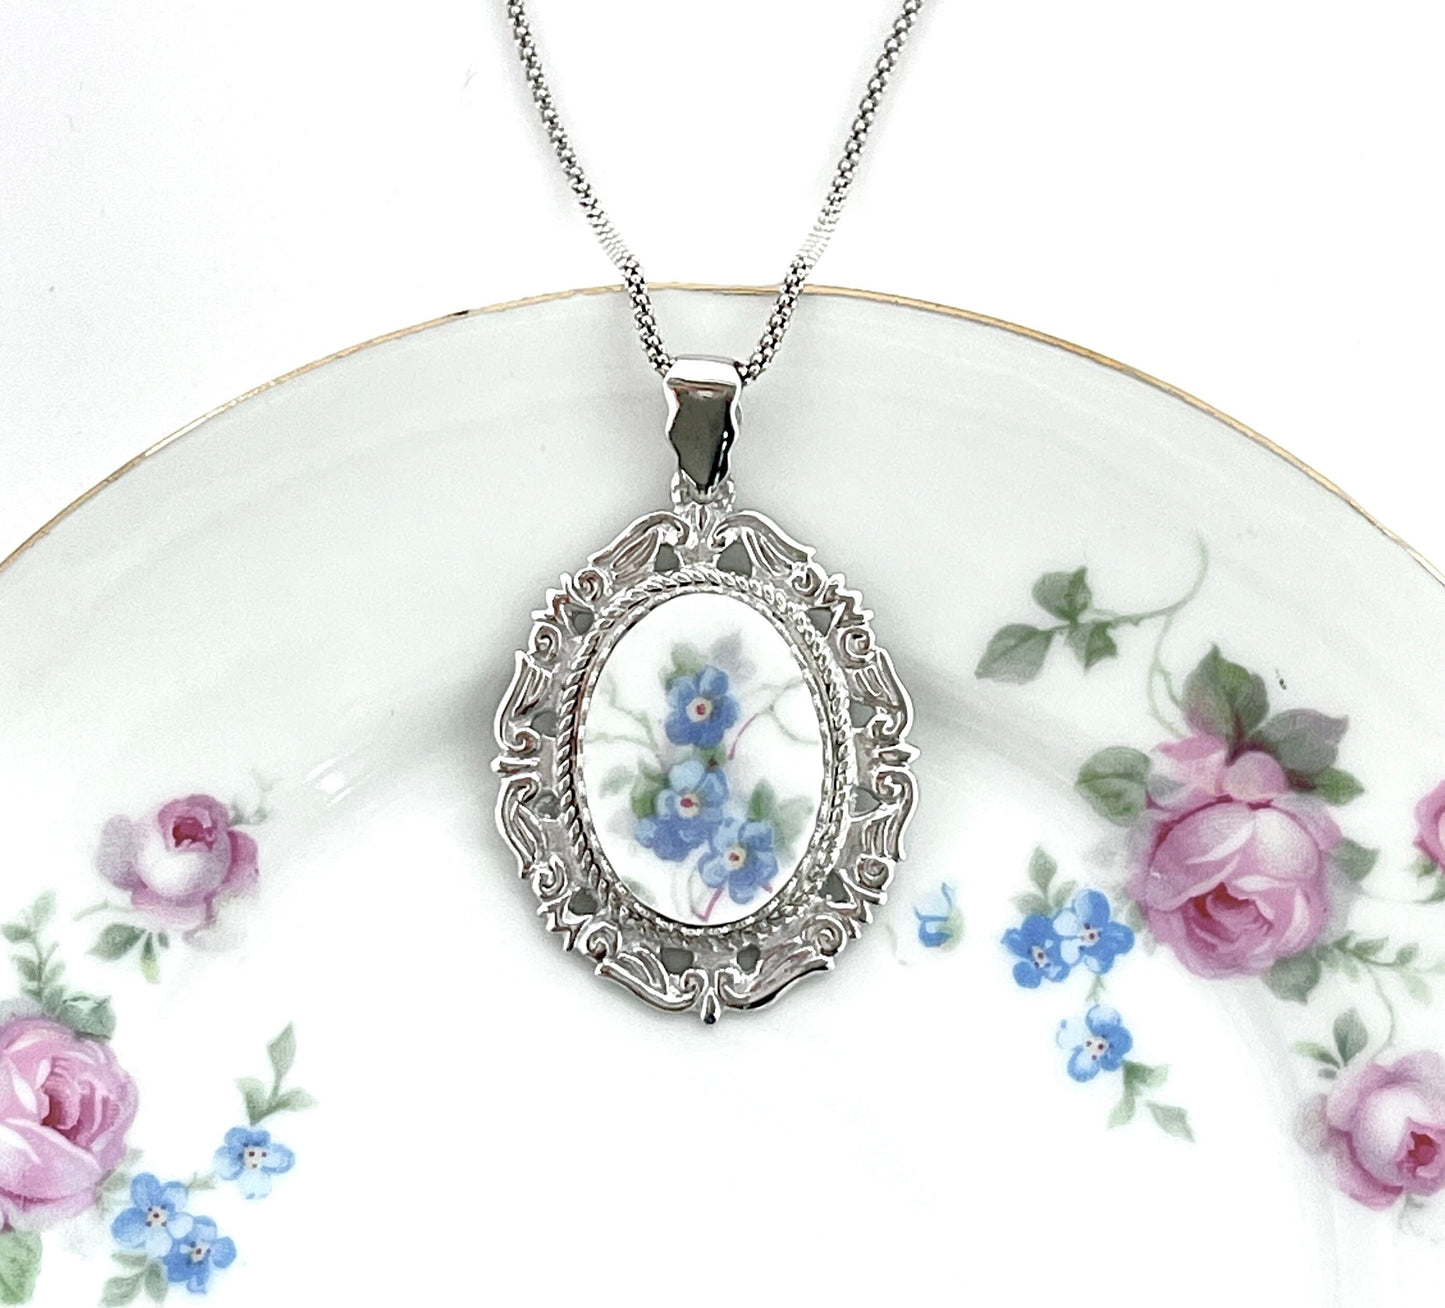 Broken China Jewelry, Sterling Silver Forget Me Not Flower Necklace, 20th Anniversary Gift for Wife, Unique Gift for Women, Victorian